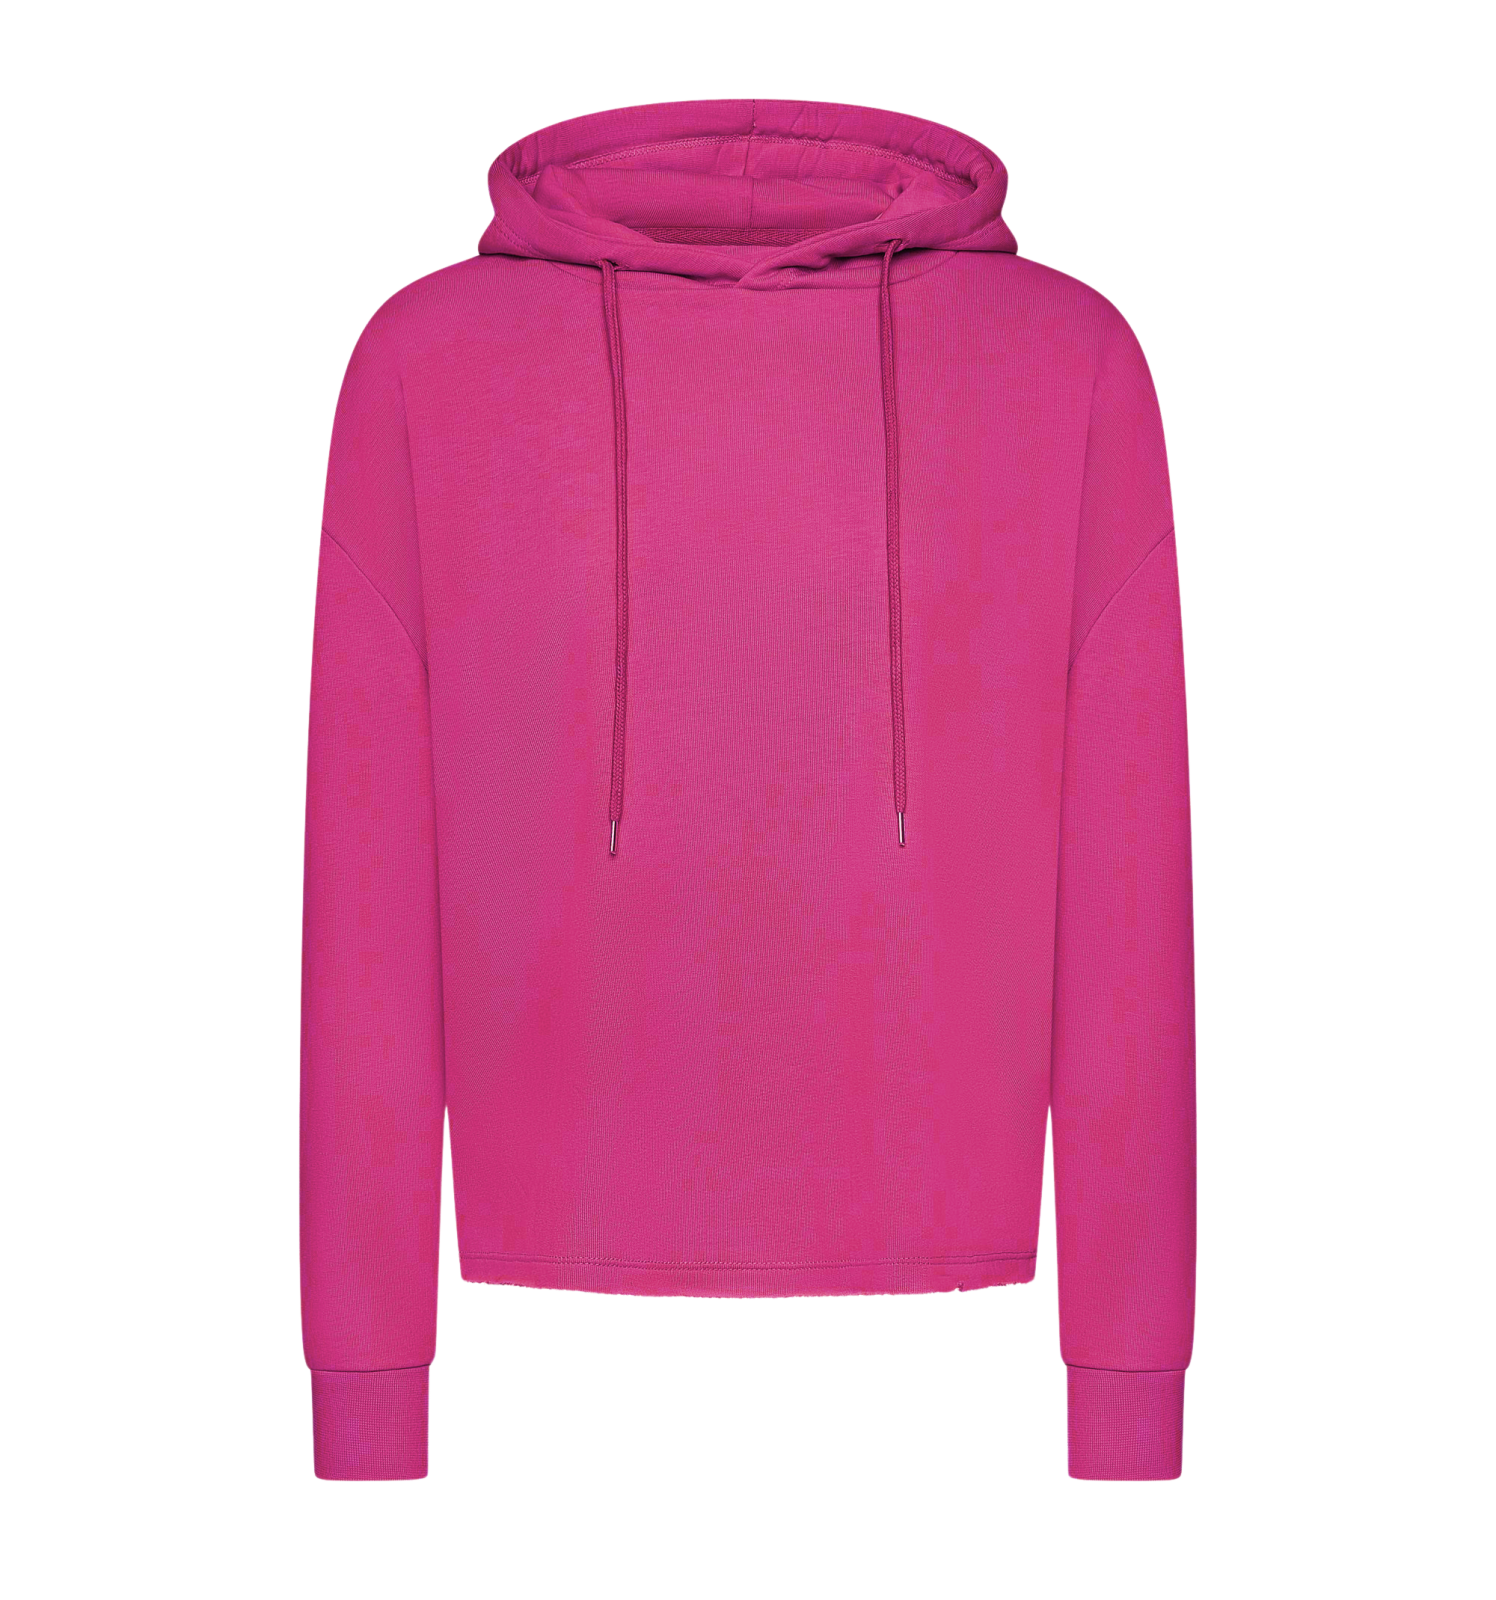 Be Famous Raw Edge Hoodie BFW2019  bright violet  XL